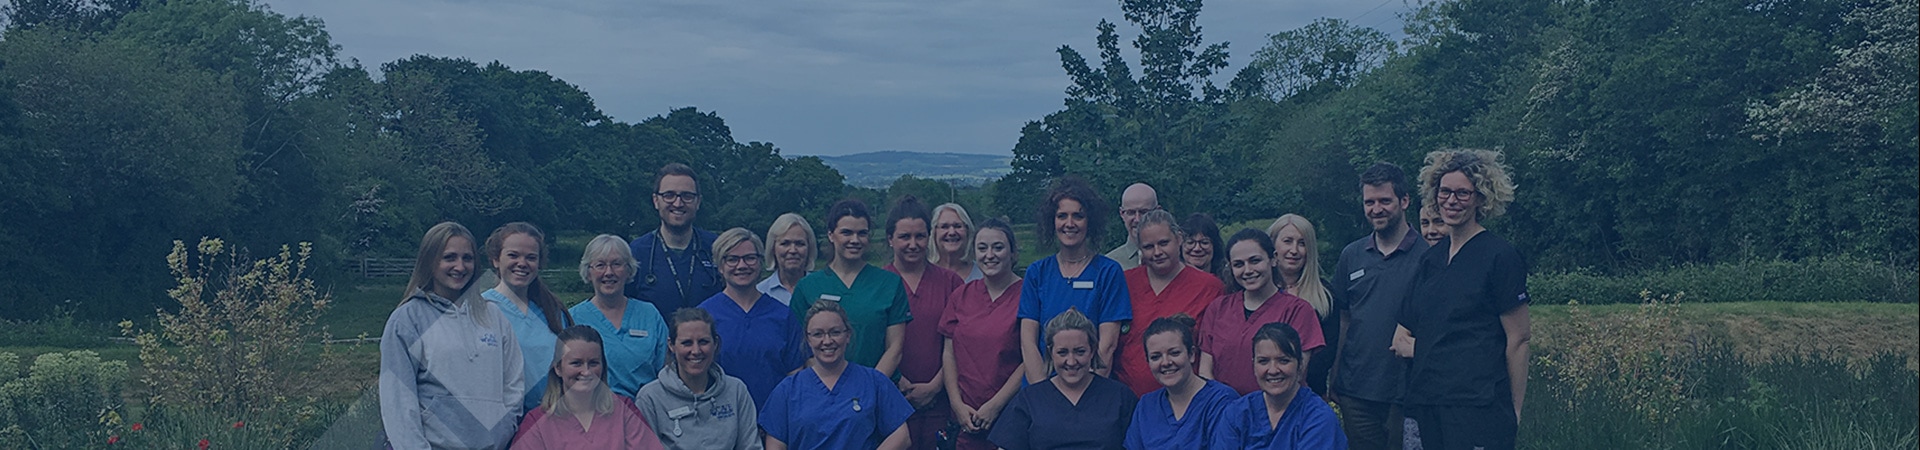 Animal Care Assistant Team | Cave Veterinary Specialists